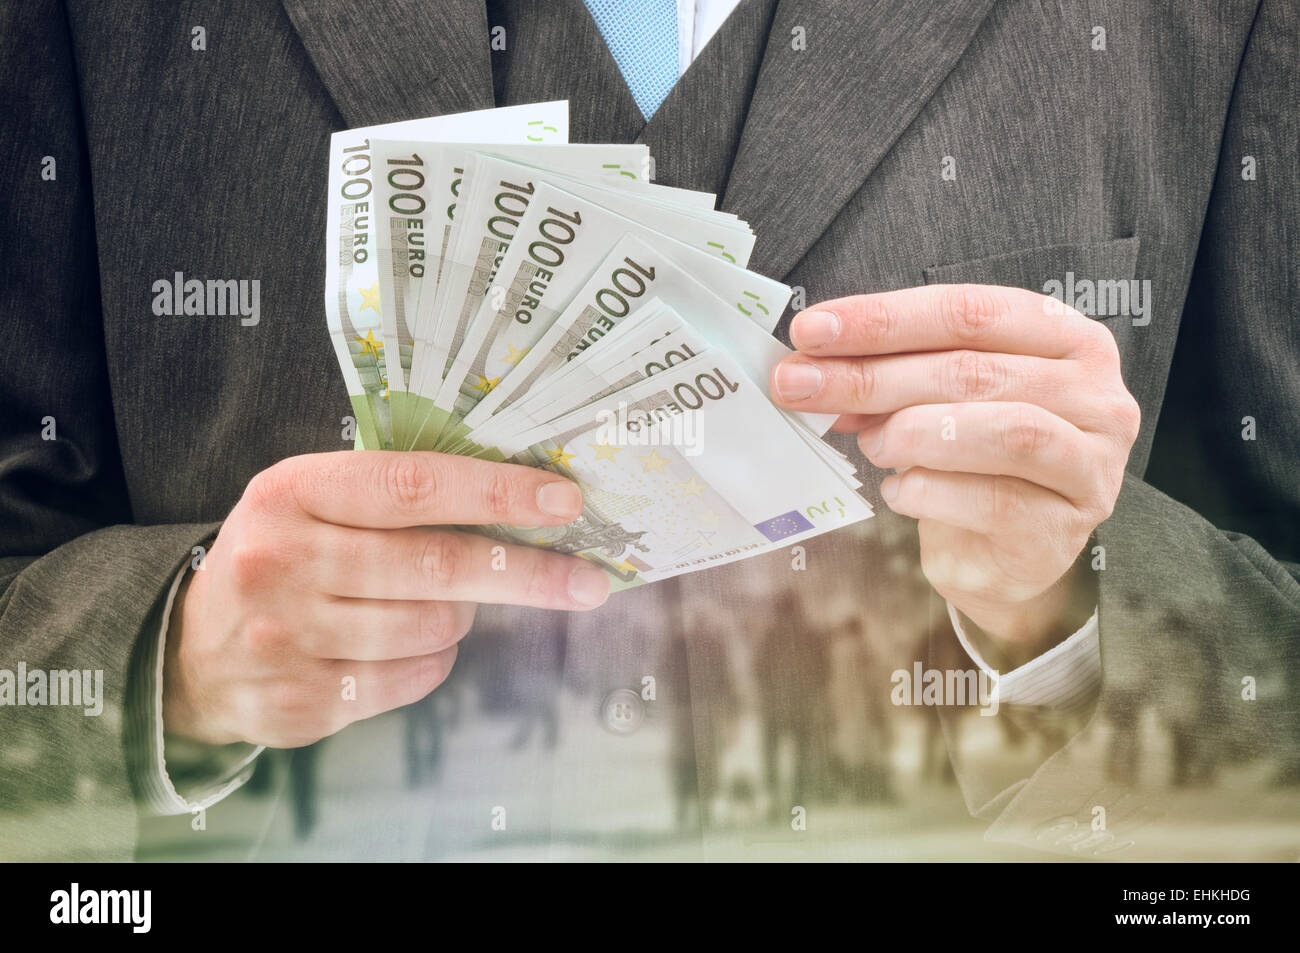 Bank Officer Providing Service of Installment Loan in Cash, Euro Banknotes. Stock Photo